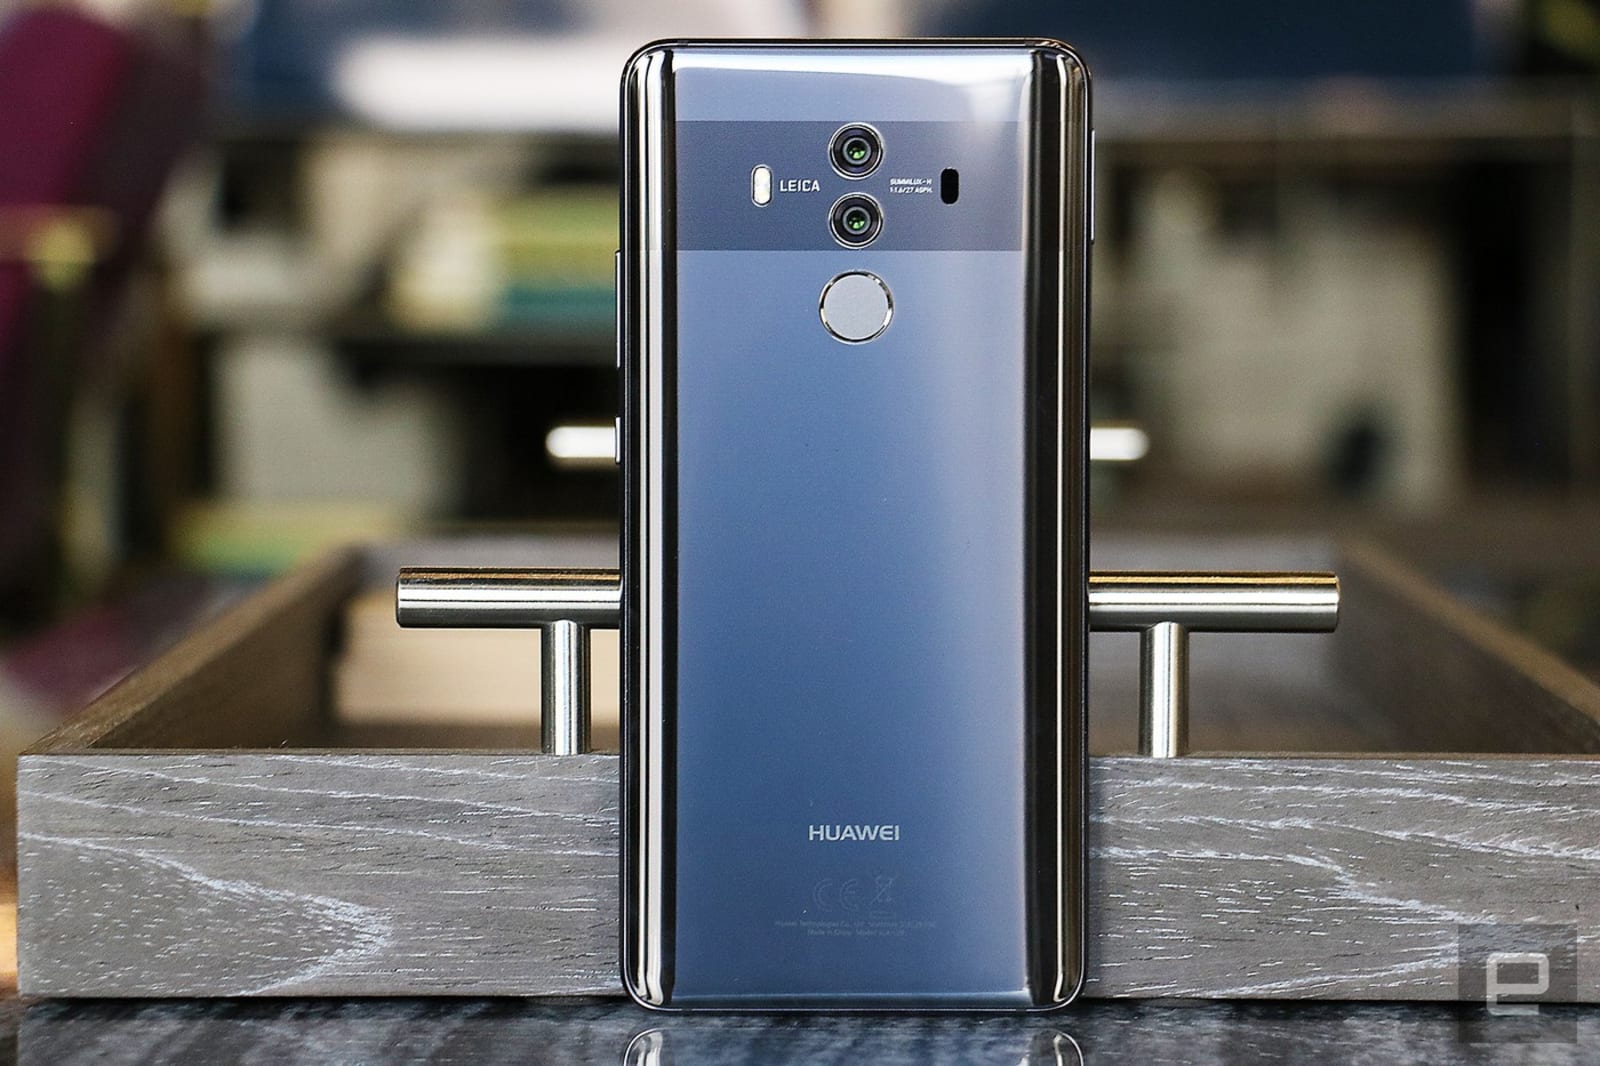 A dedicated AI chip is squandered on Huawei's Mate 10 Pro